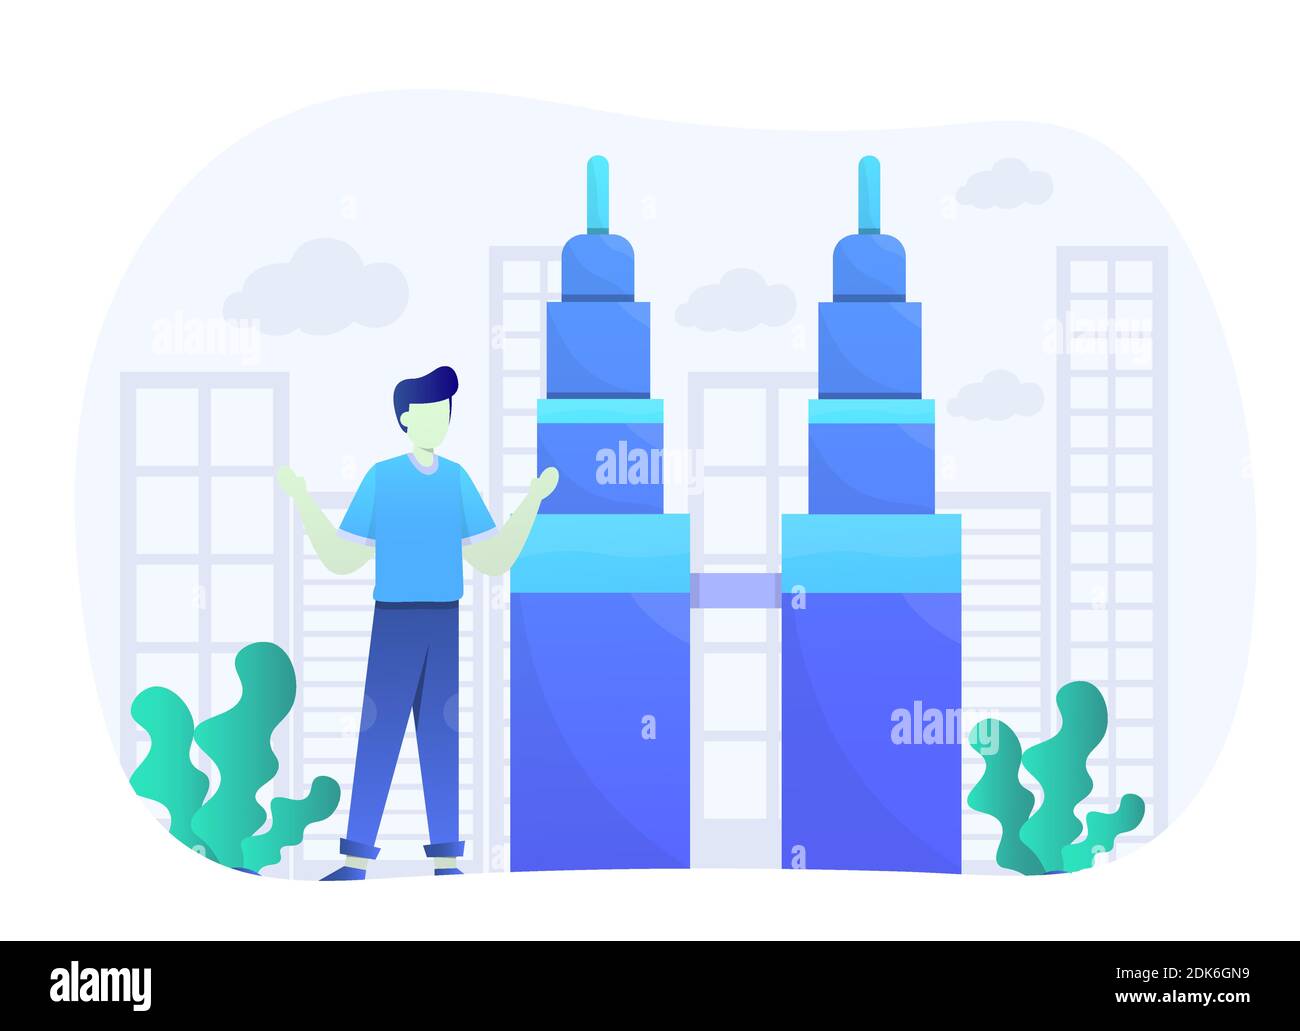 Twin Towers Flat Design Vector Graphic. Stock Vector